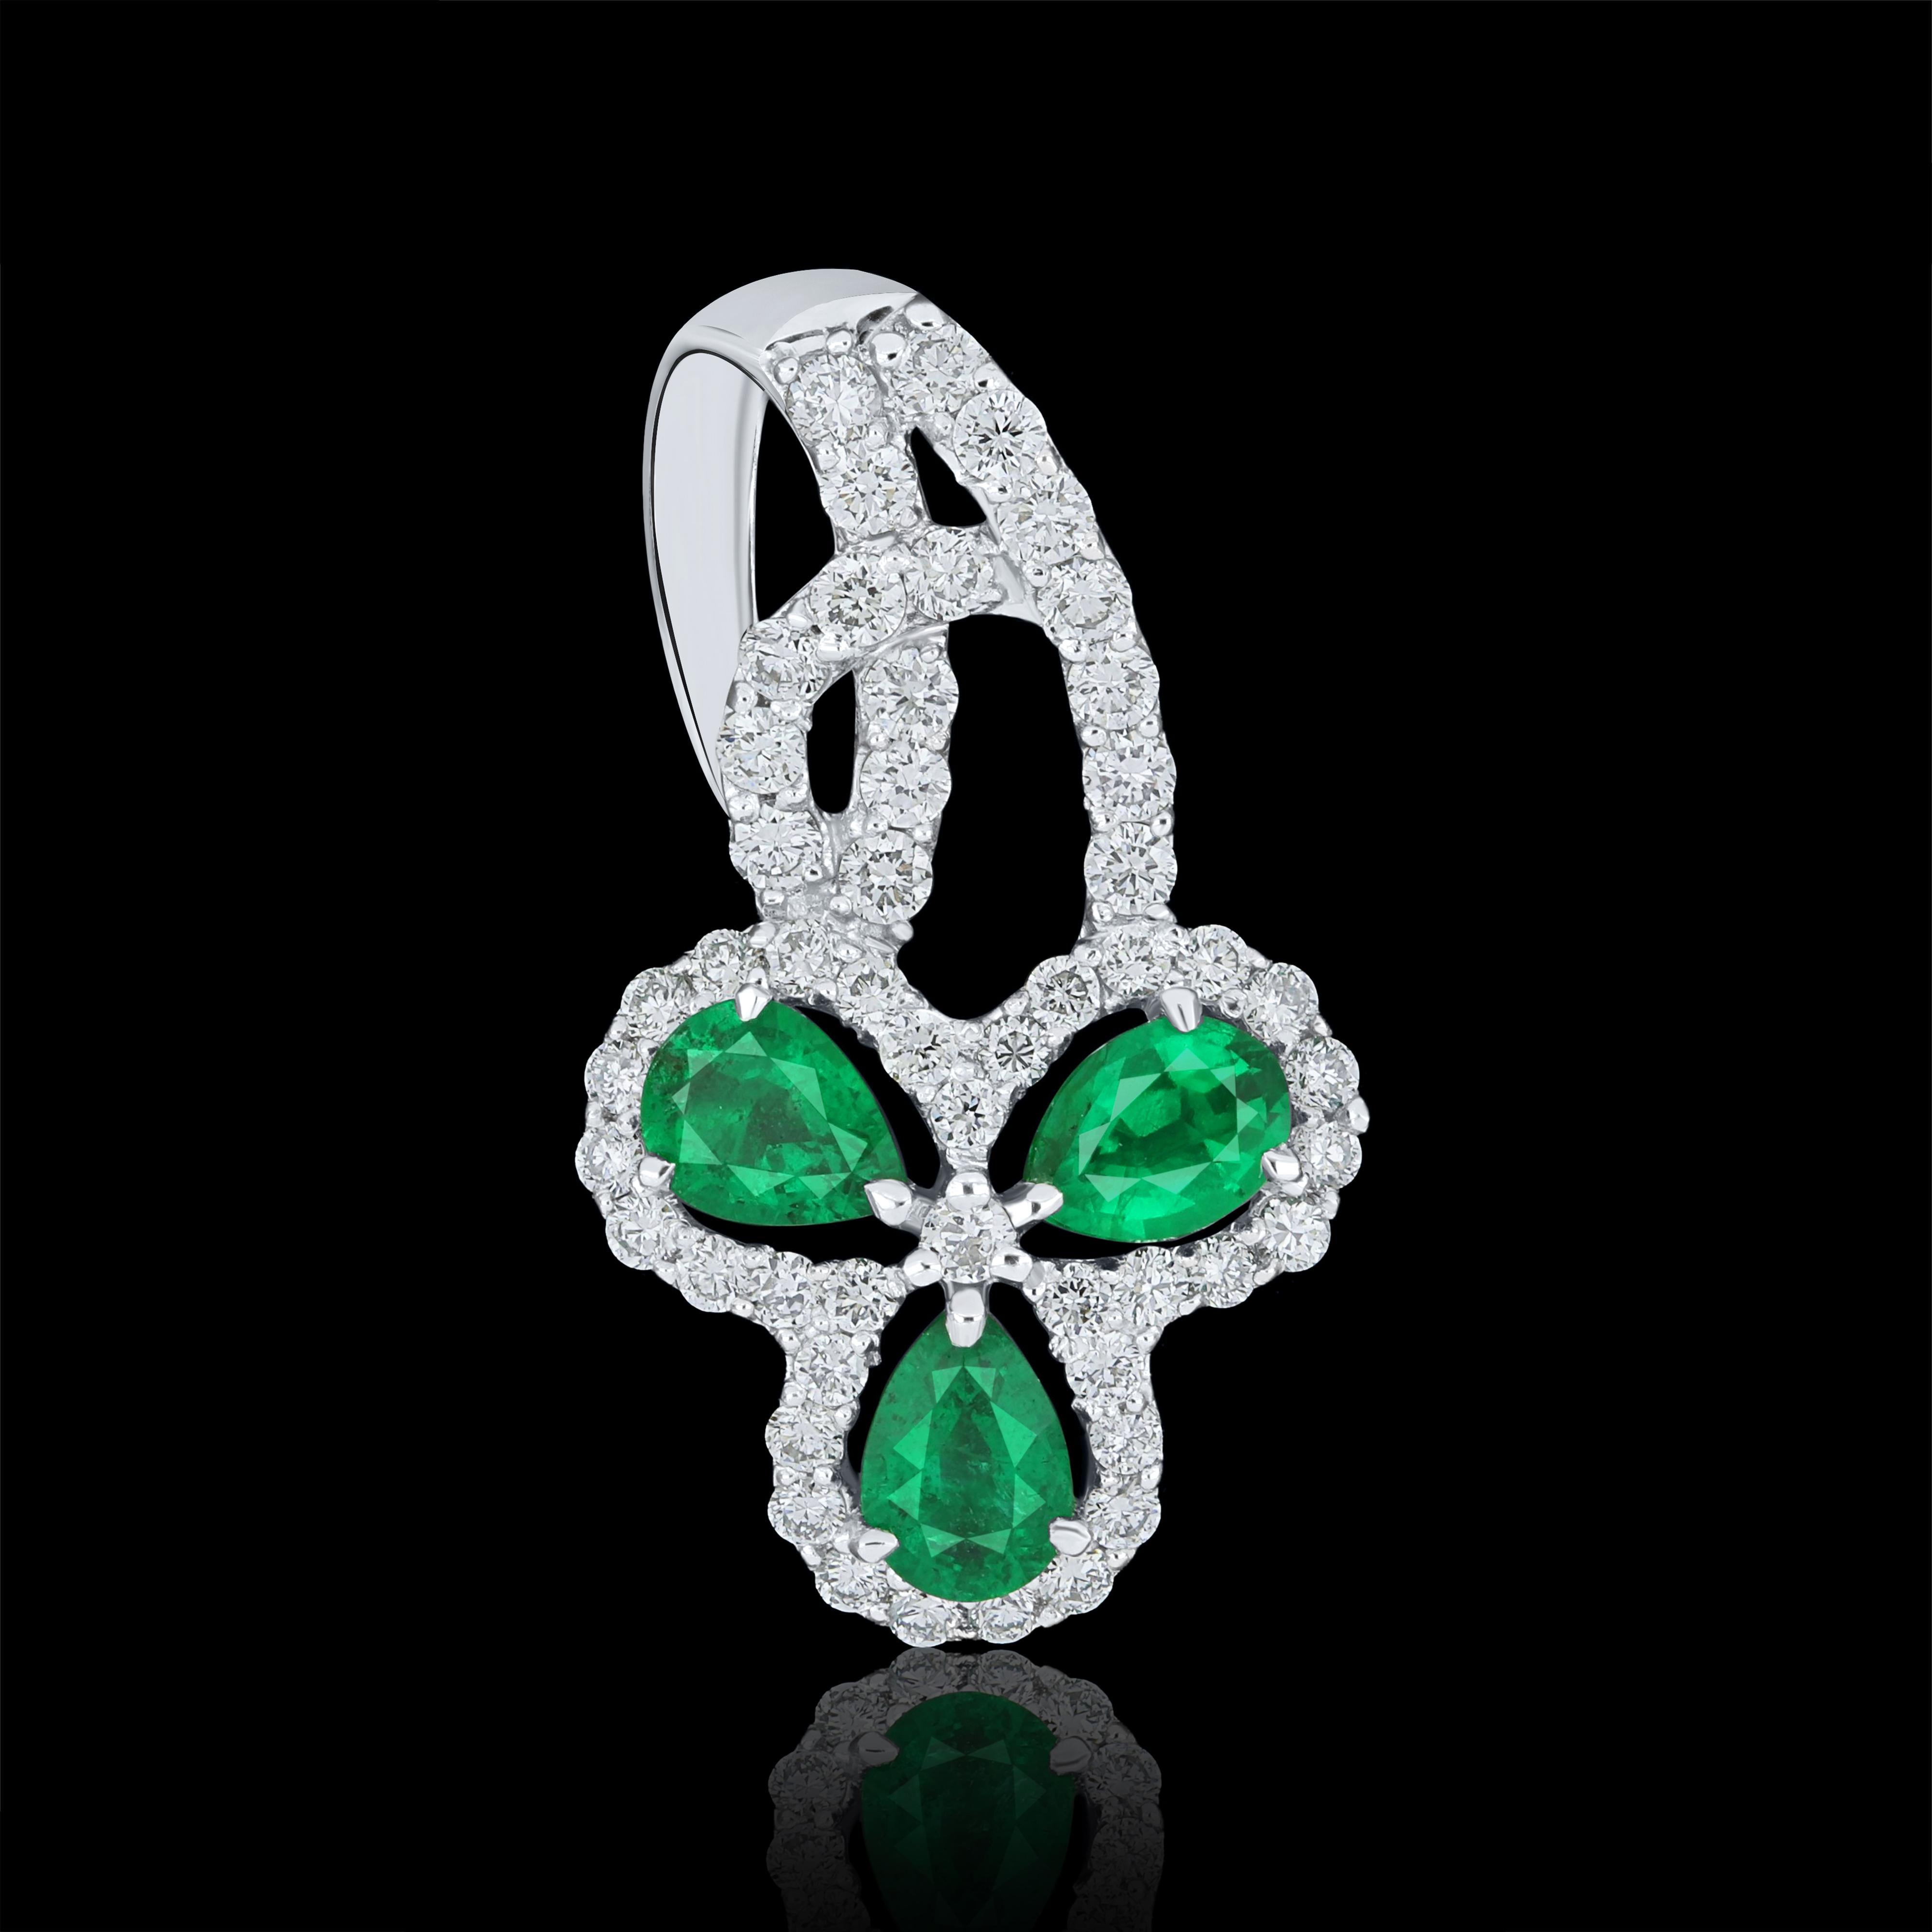 Elegant and exquisitely detailed 18 Karat White Gold Pendant, center set with 0.38Cts .Pear Shape Emerald and micro pave set Diamonds, weighing approx. 0.34Cts Beautifully Hand crafted in 18 Karat White Gold.

Stone Detail:
Emerald: 4x3MM

Stone